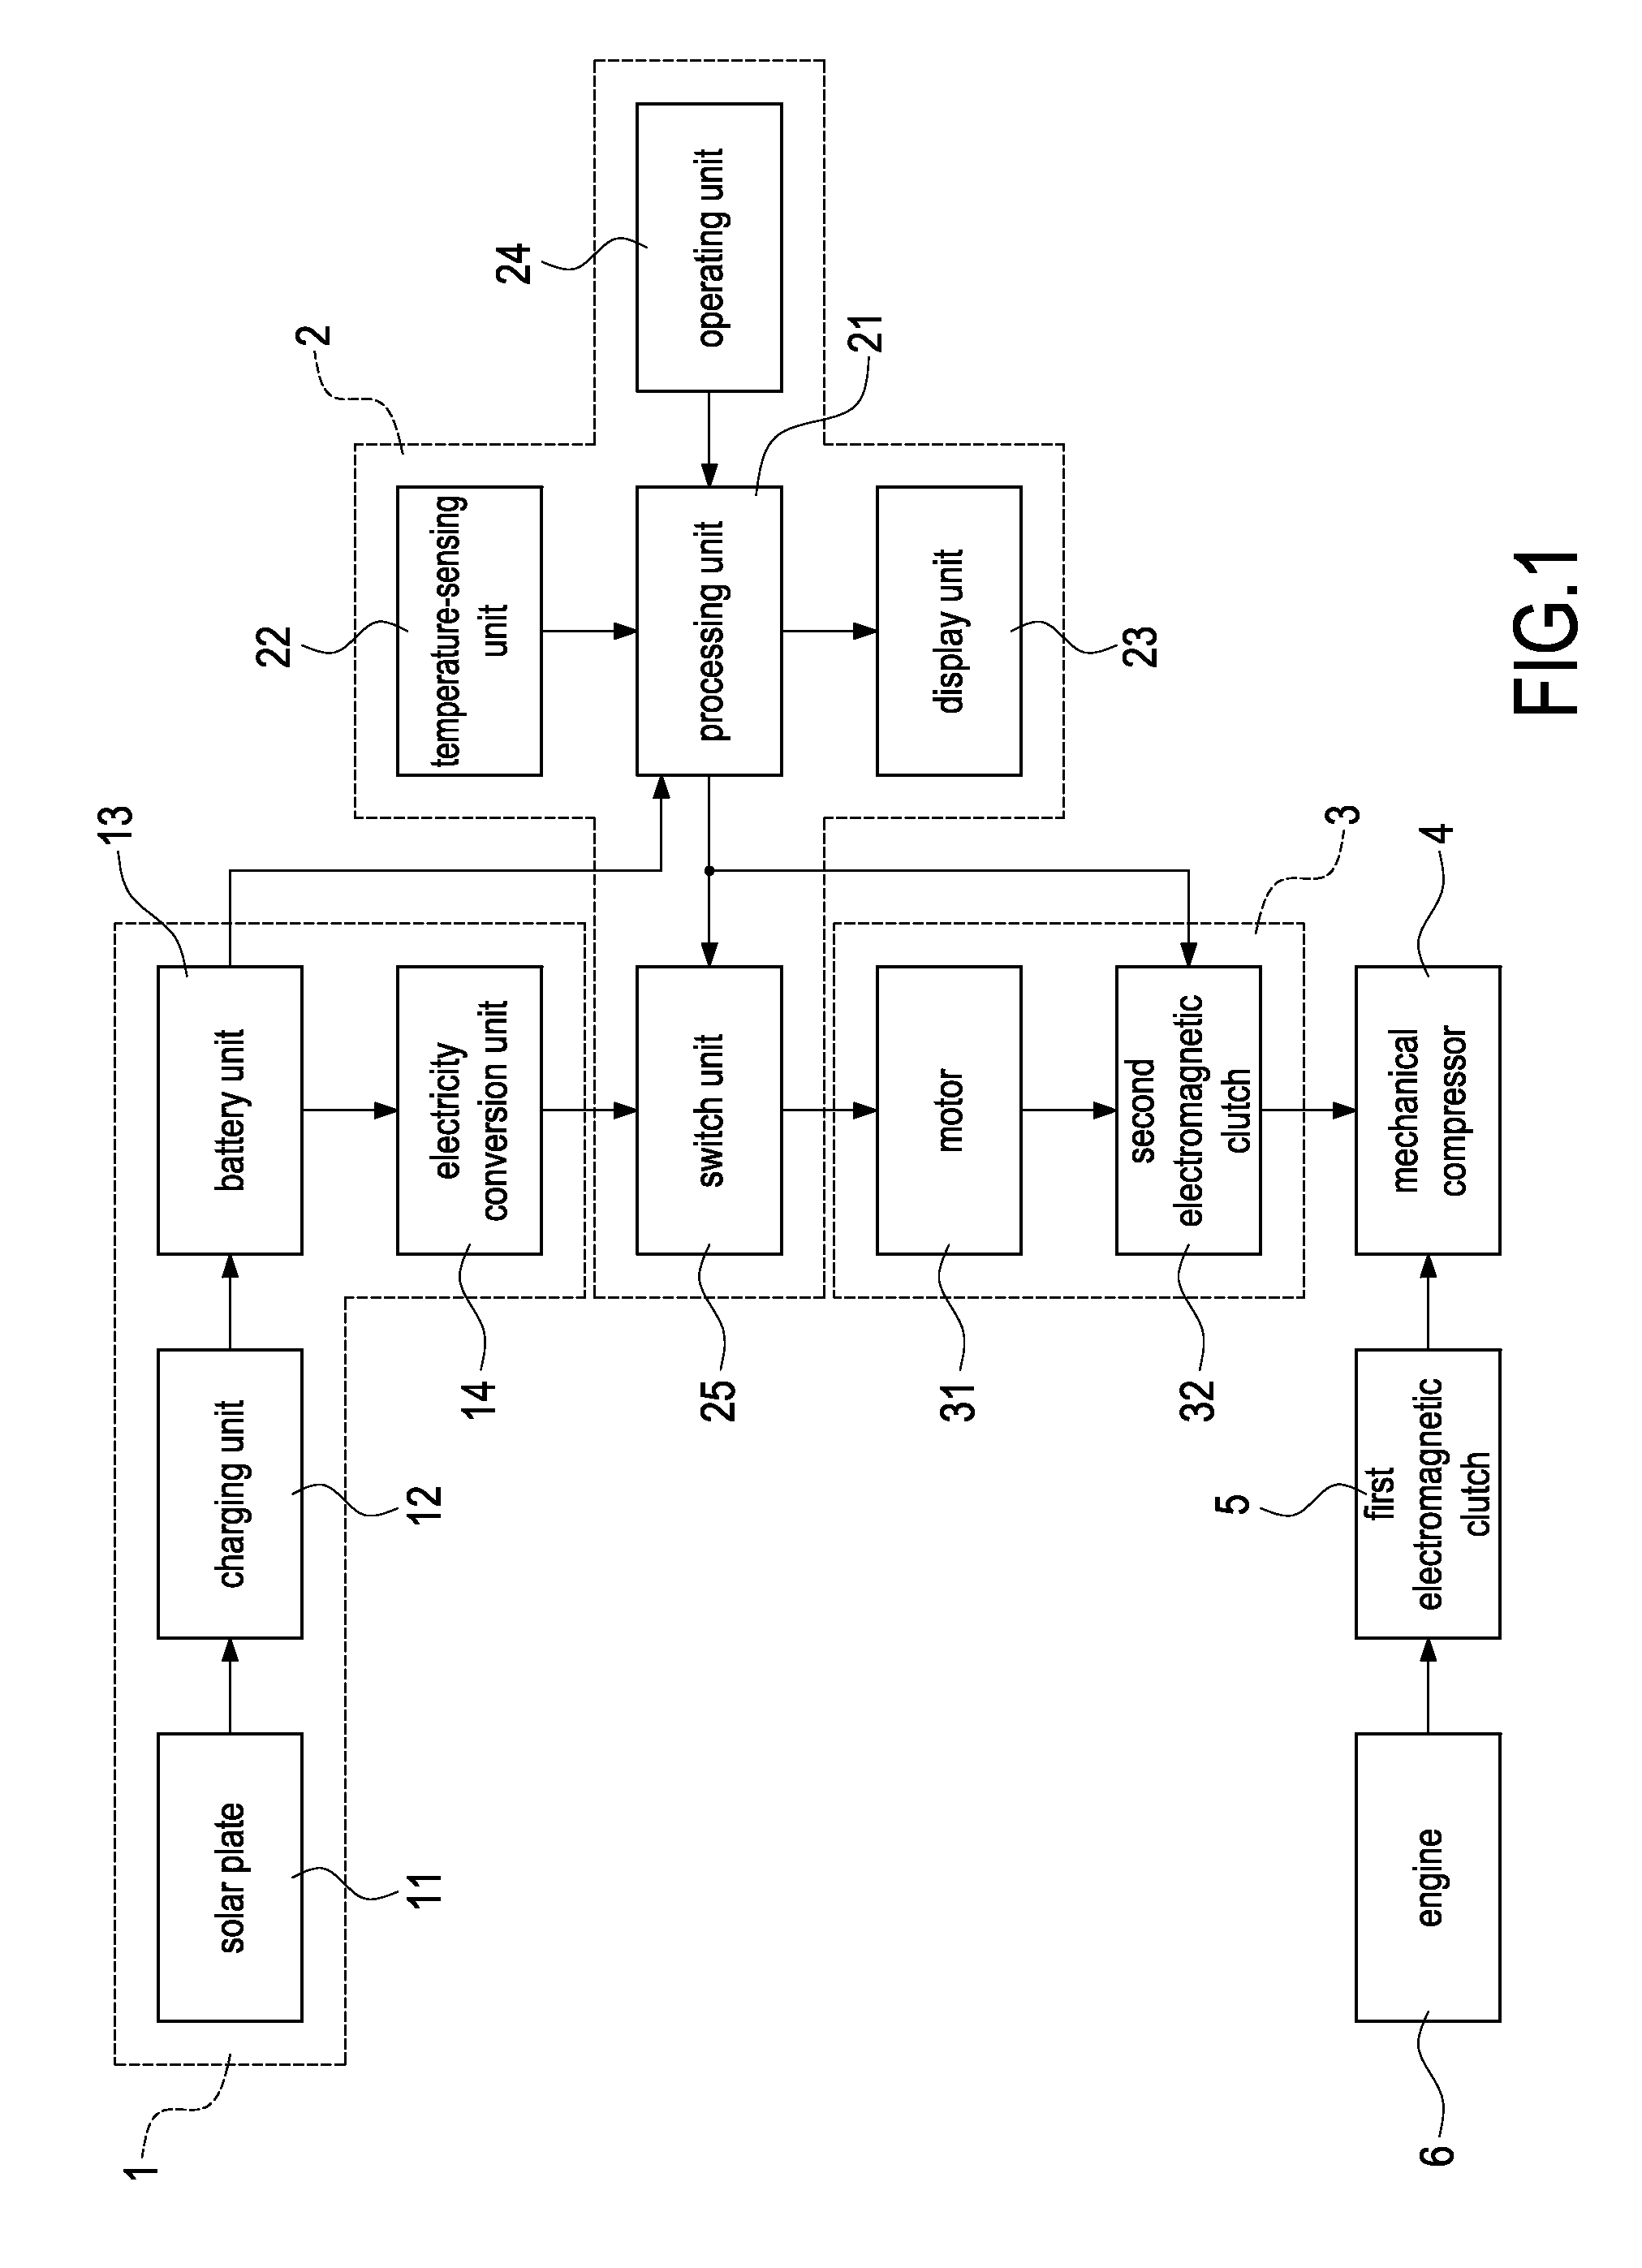 Automobile Solar Air-Conditioning Control System